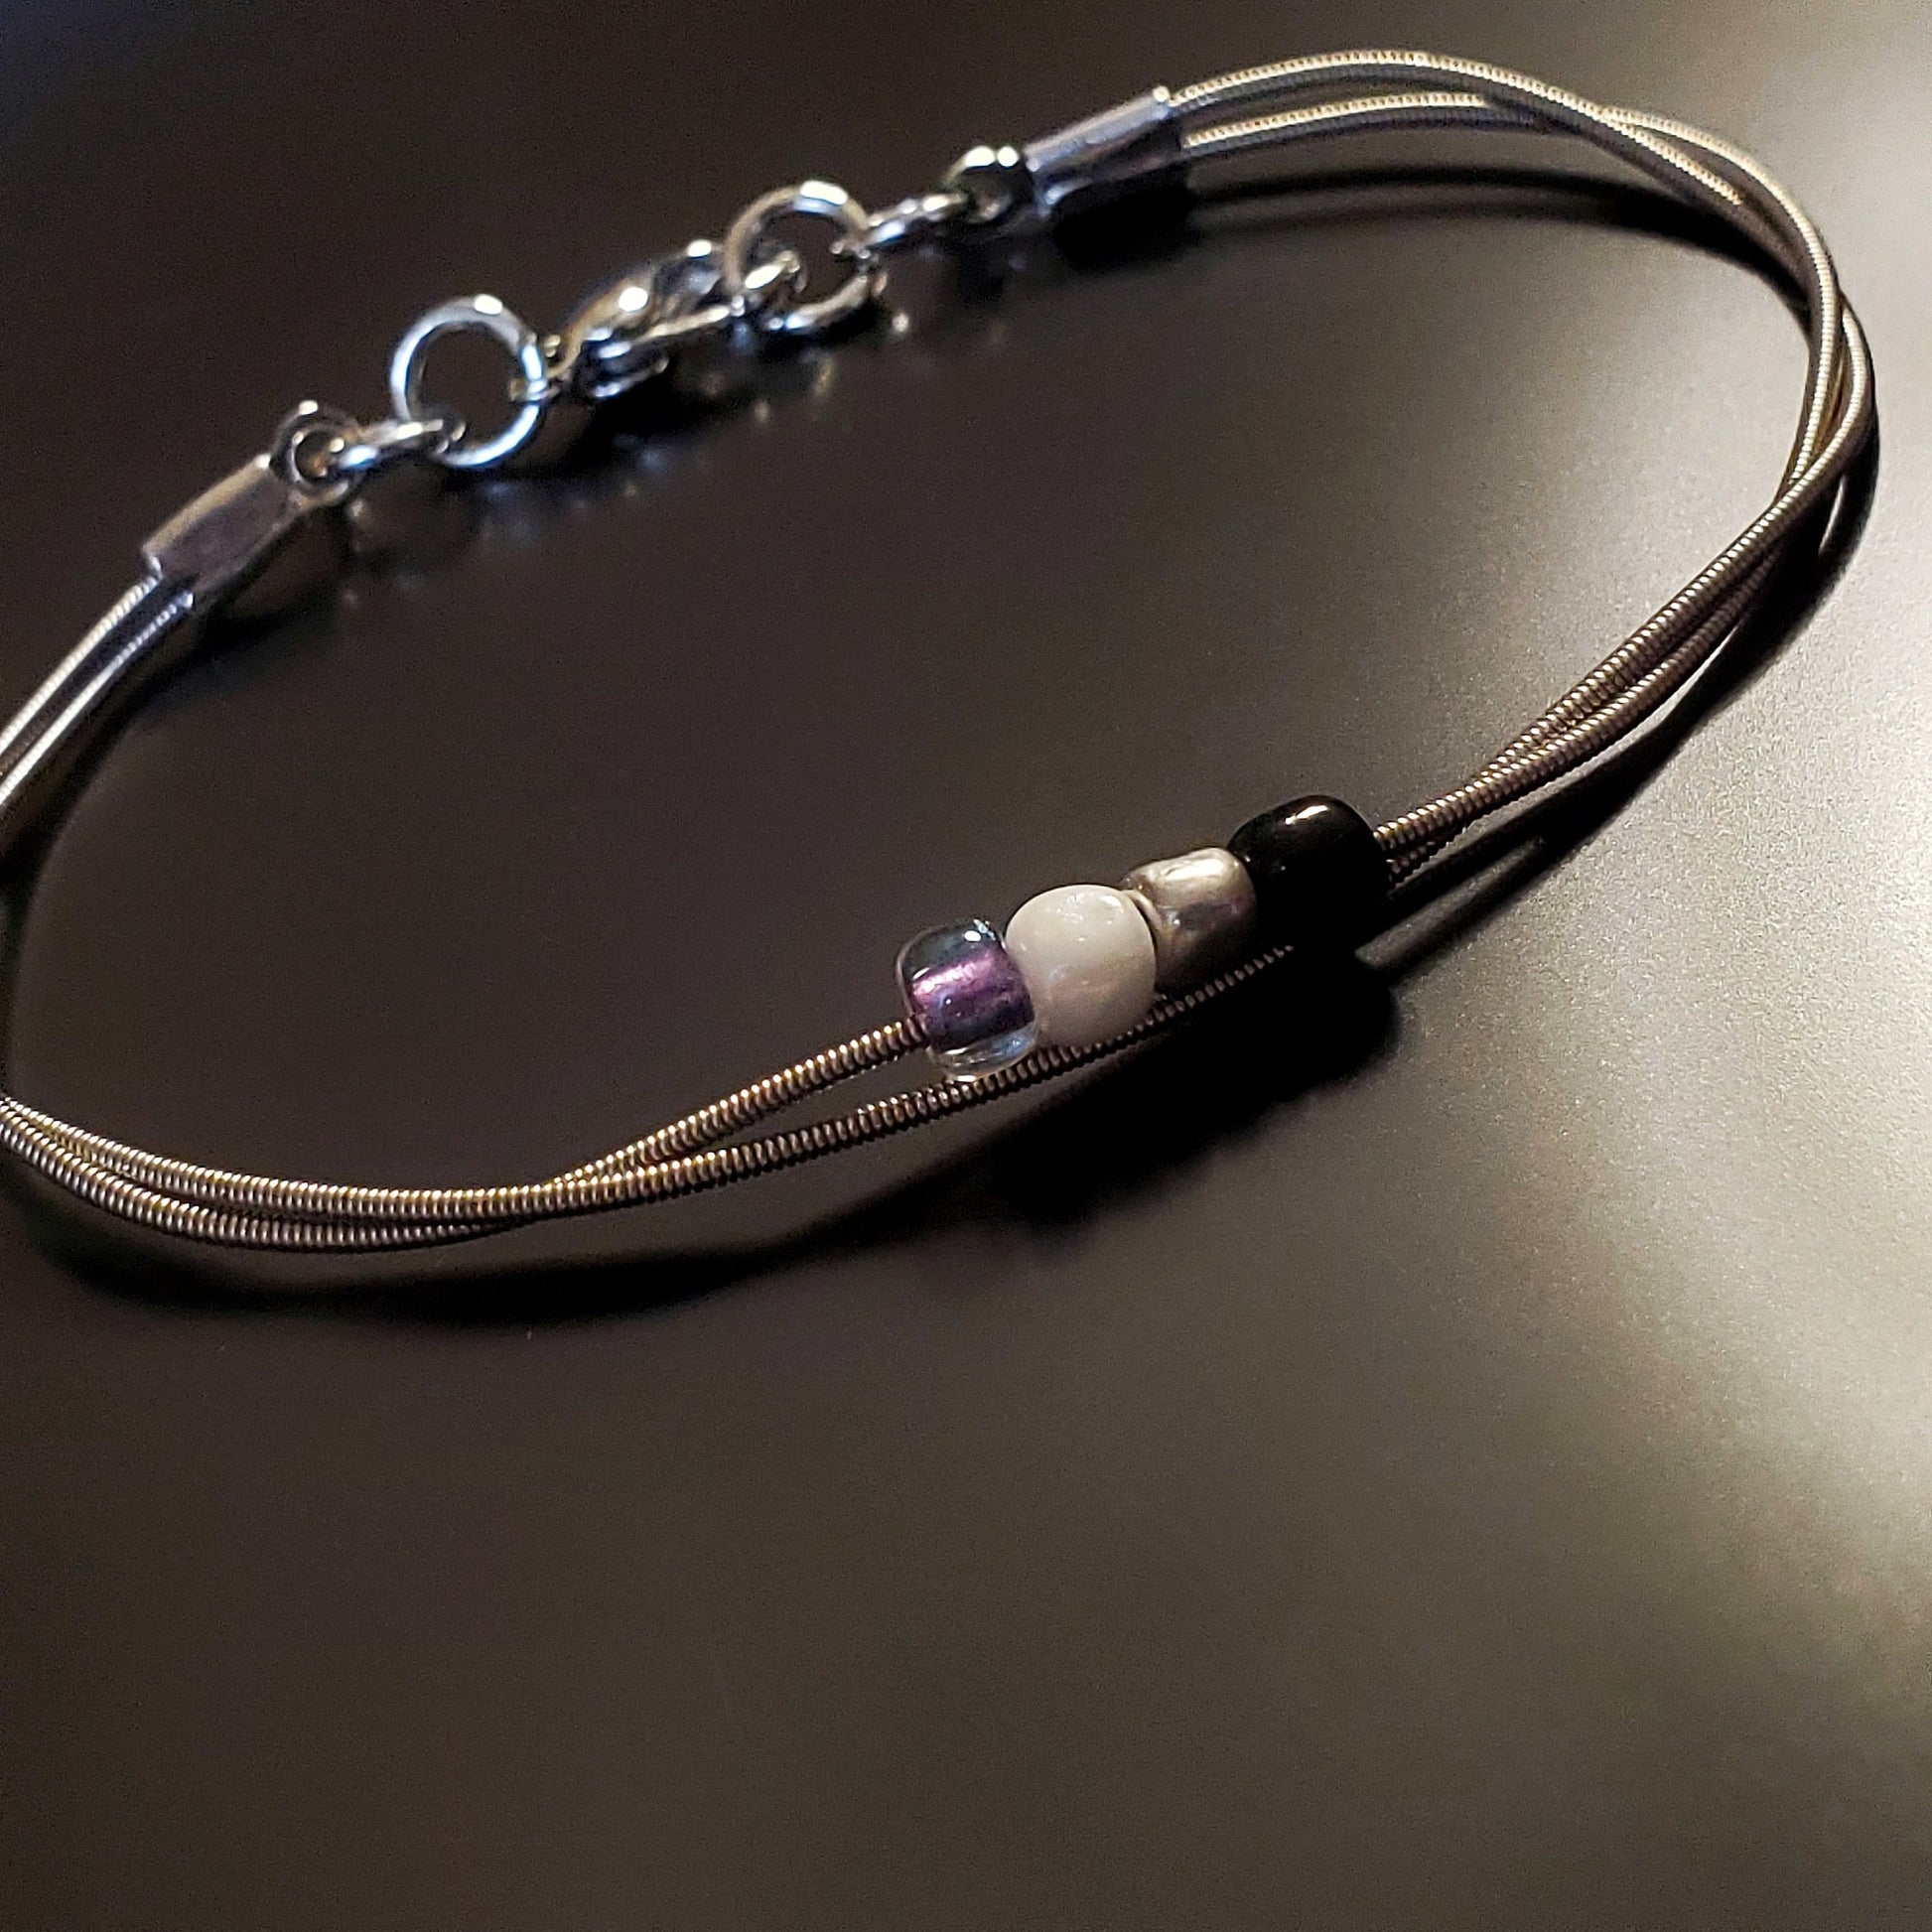 silver coloures clasp style bracelet with 4 glass beads representing the asexual pride flag (black, grey, white & purple) 